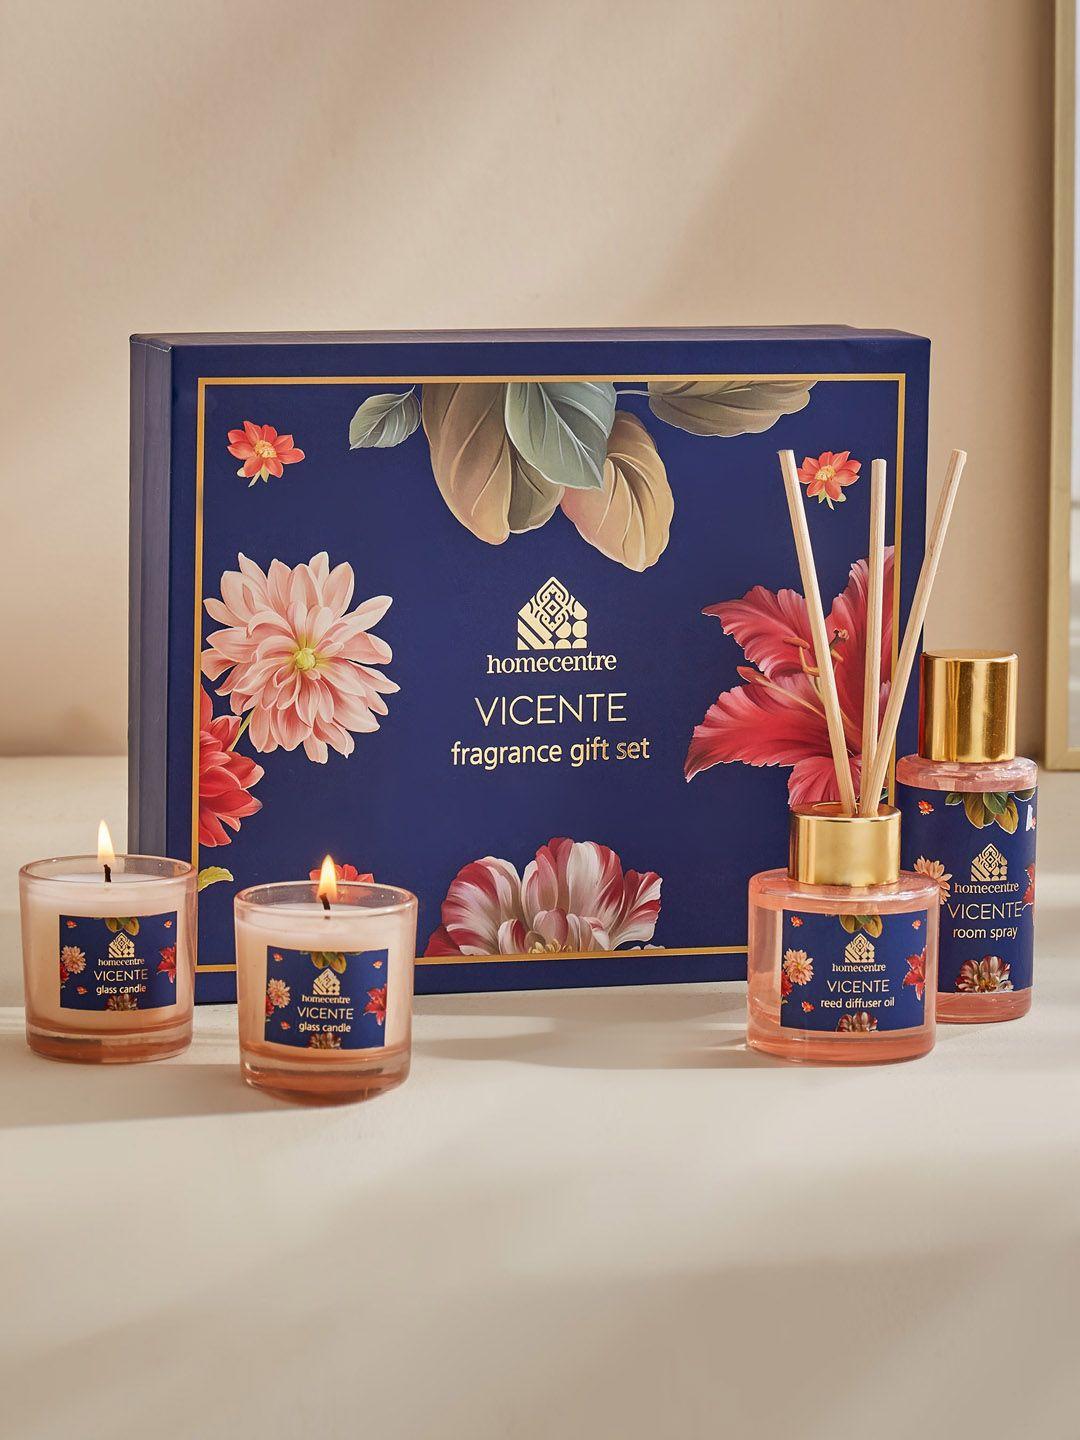 home centre vicente blue 5 pieces floral scented frgrance gift set